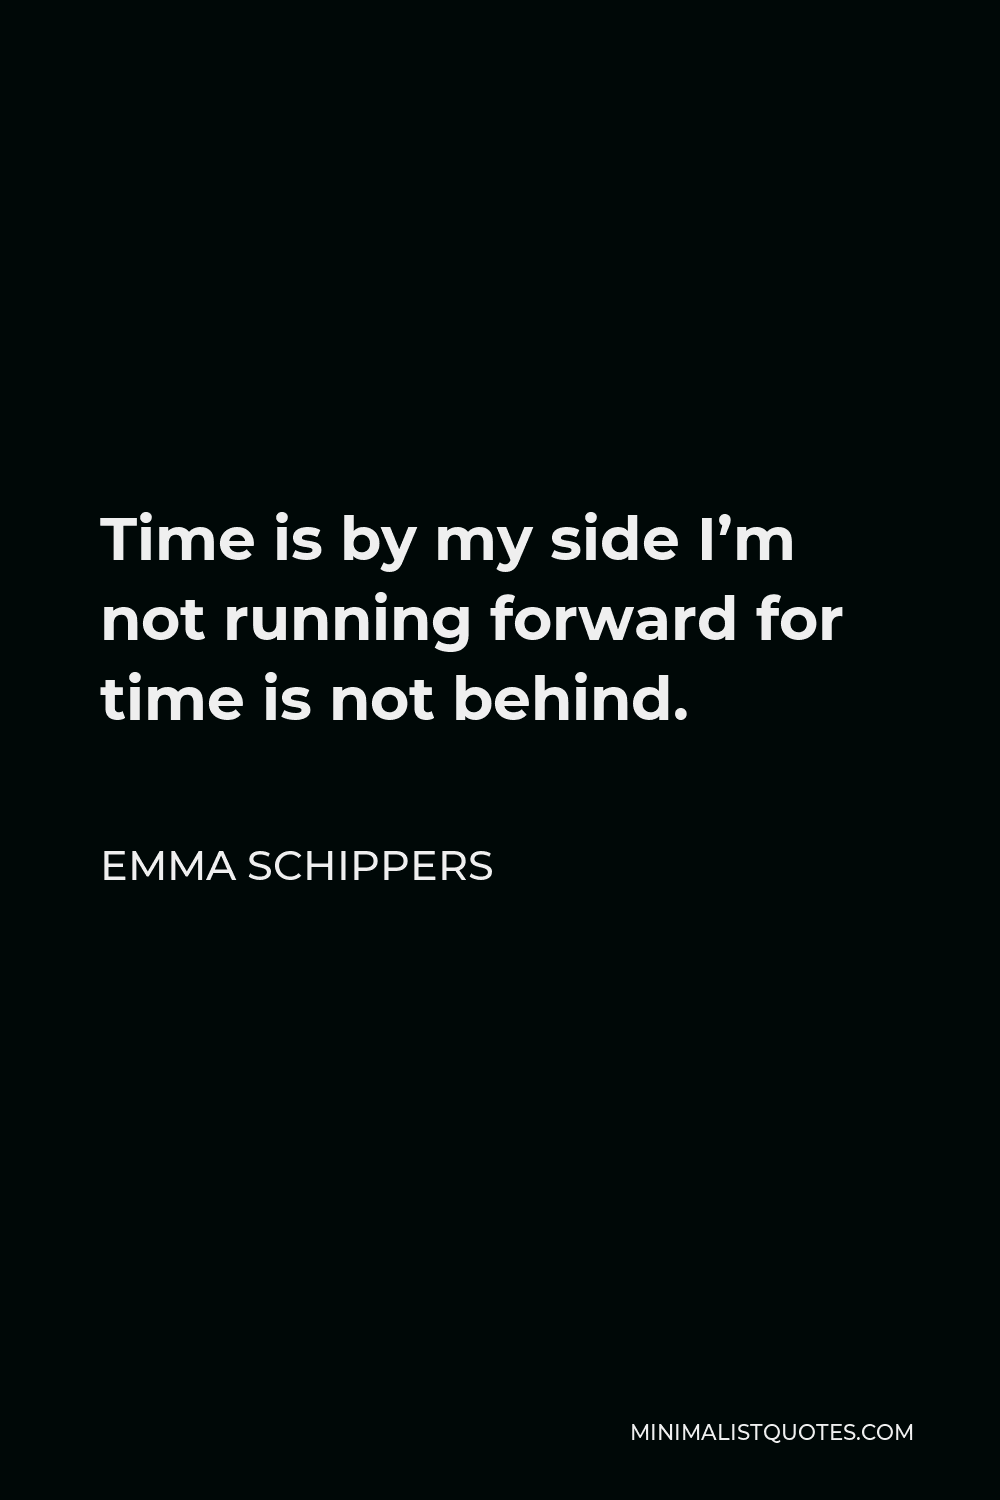 Emma Schippers Quote - Time is by my side I’m not running forward for time is not behind.